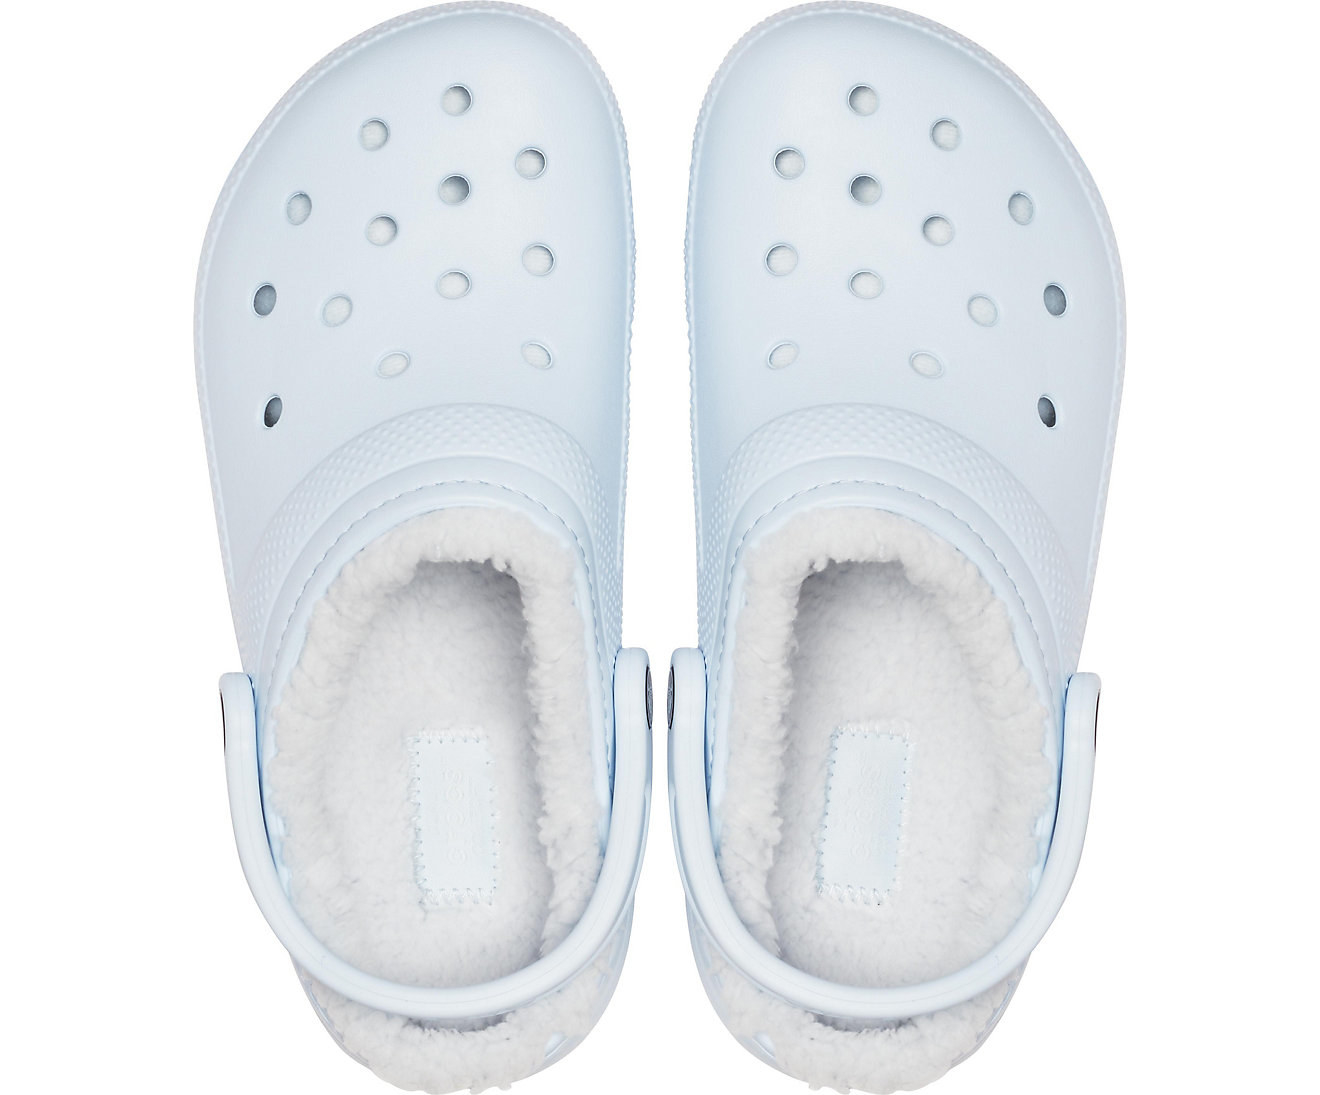 Furry lined Crocs in baby blue